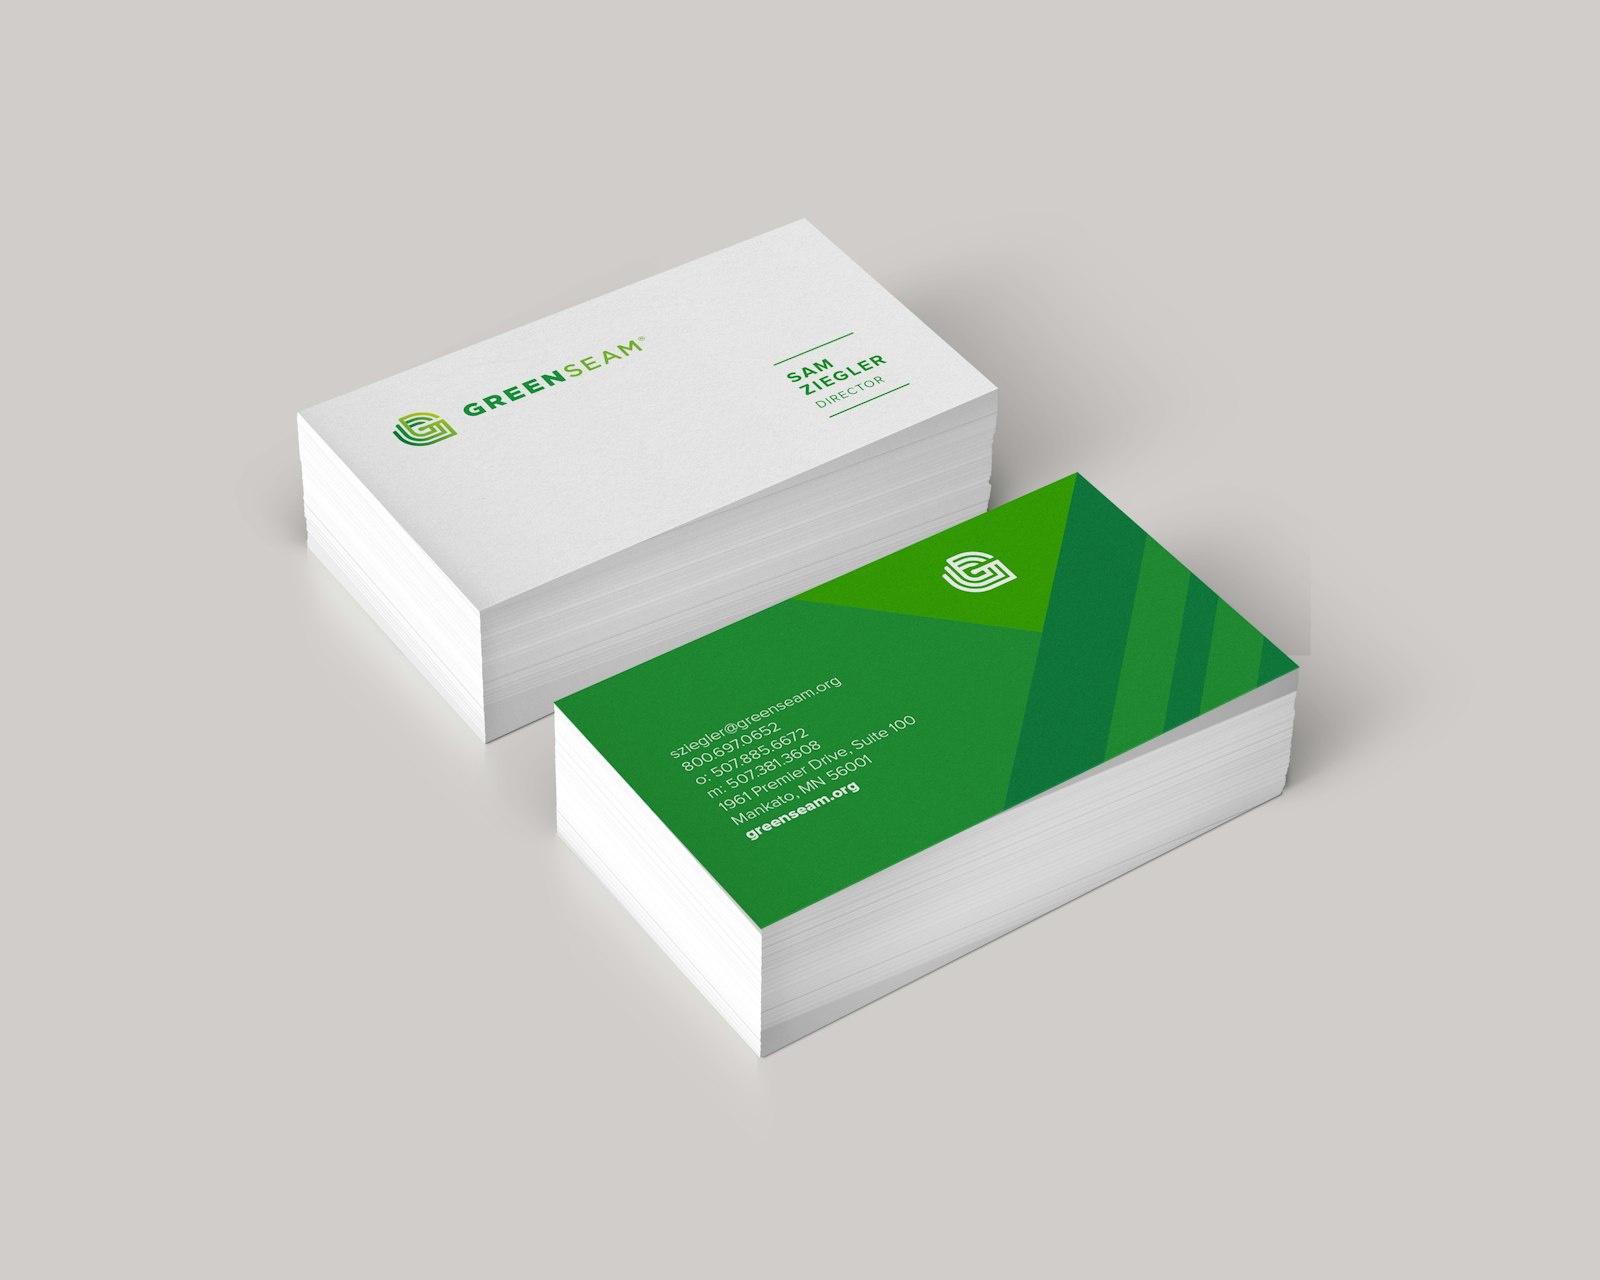 The GreenSeam brand logo design business cards in a stack on a white surface.